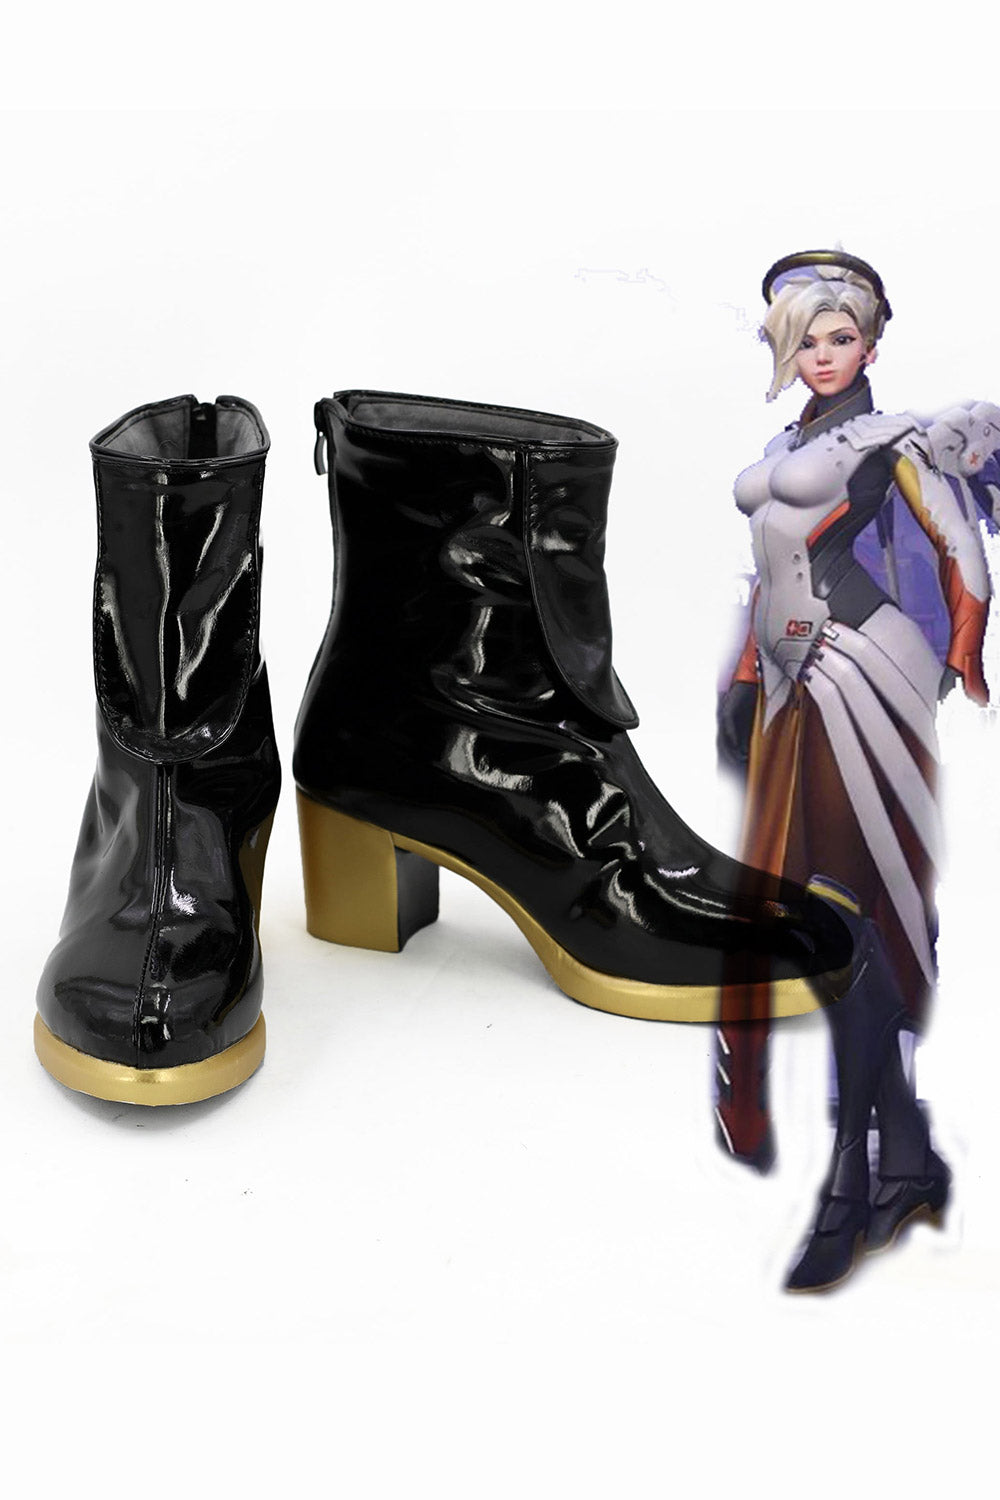 Overwatch OW Mercy Bottes Cosplay Chaussures